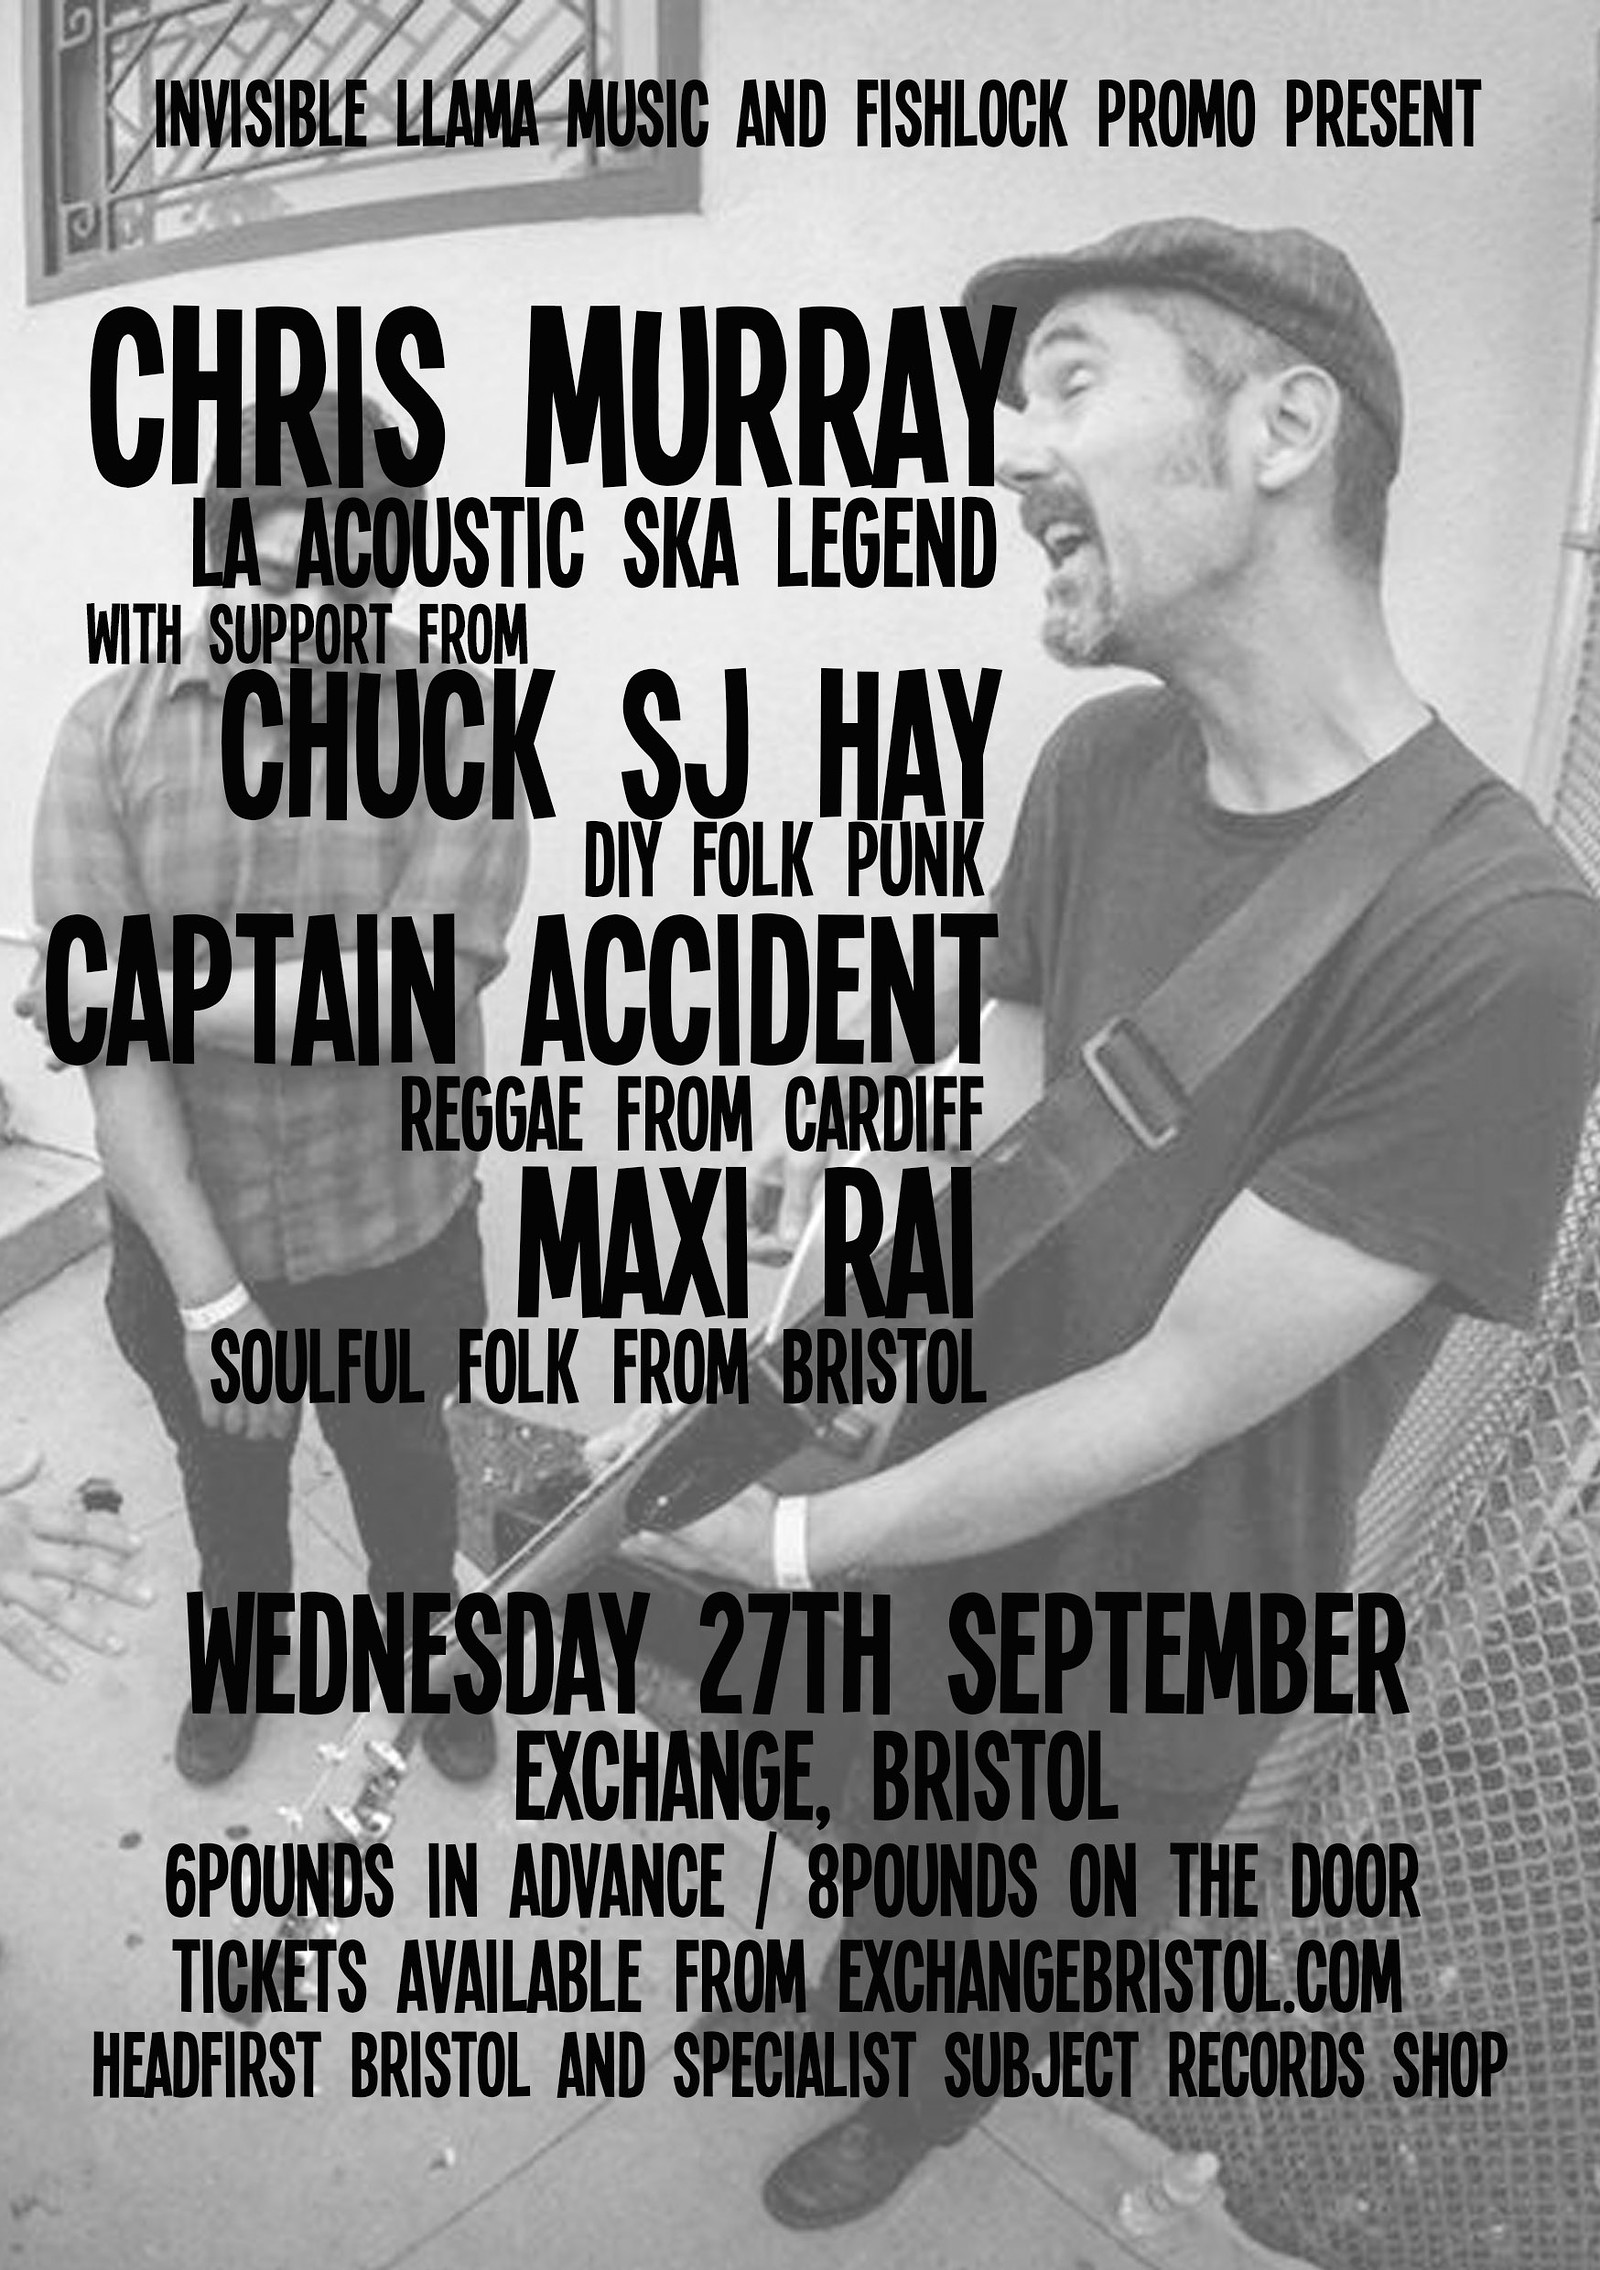 Chris Murray / Chuck SJ Hay / Captain Accident at Exchange